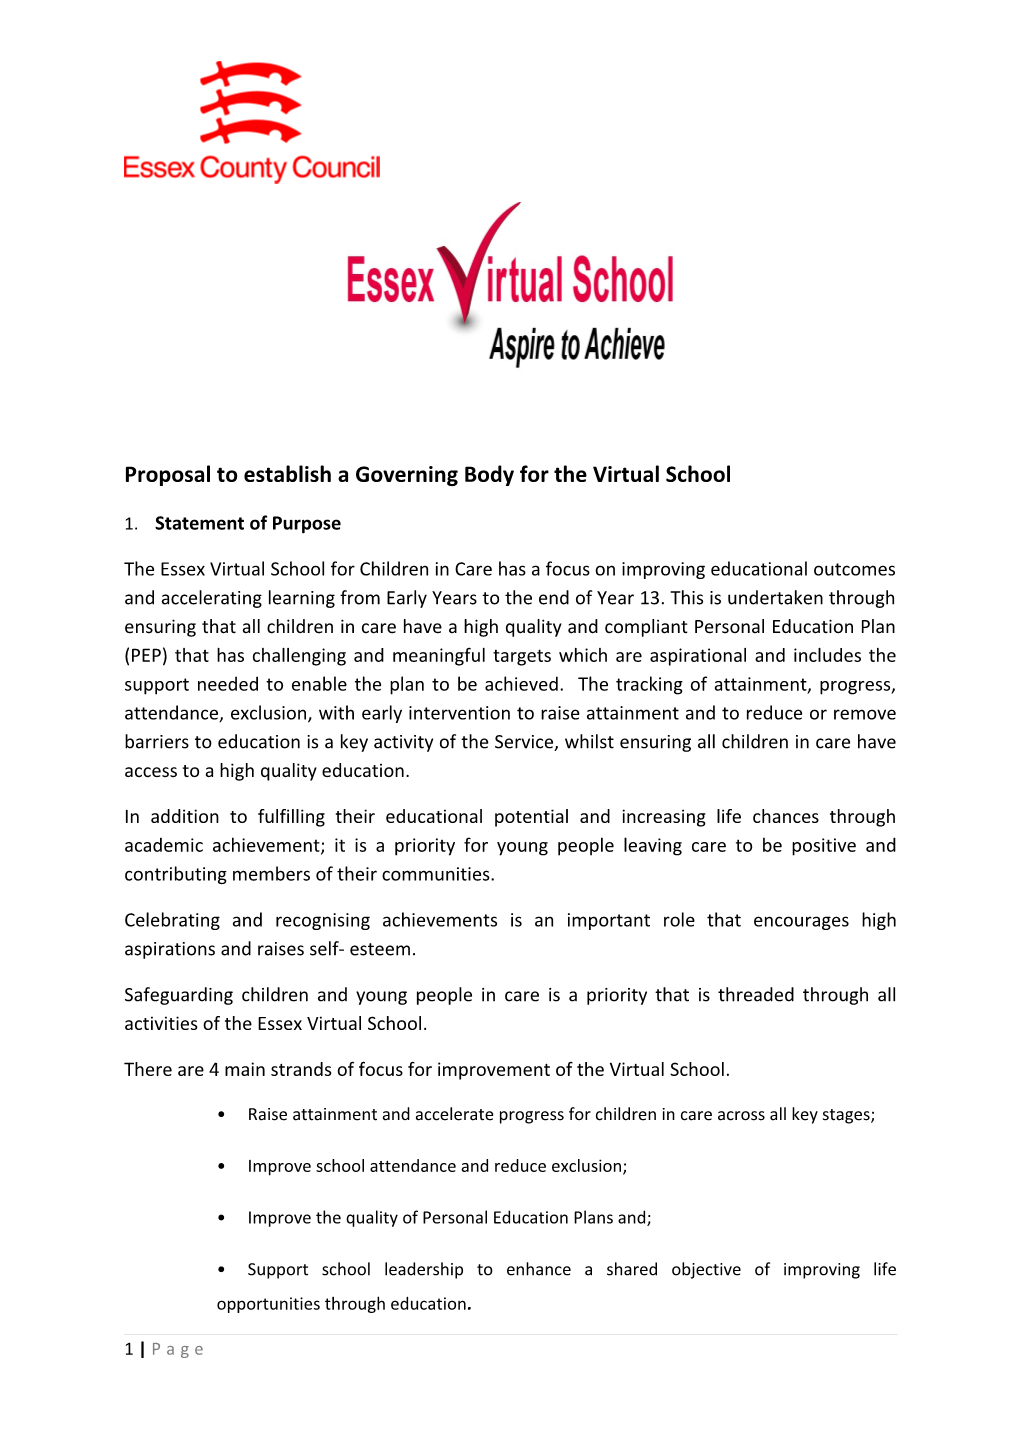 Proposal to Establish a Governing Body for the Virtual School